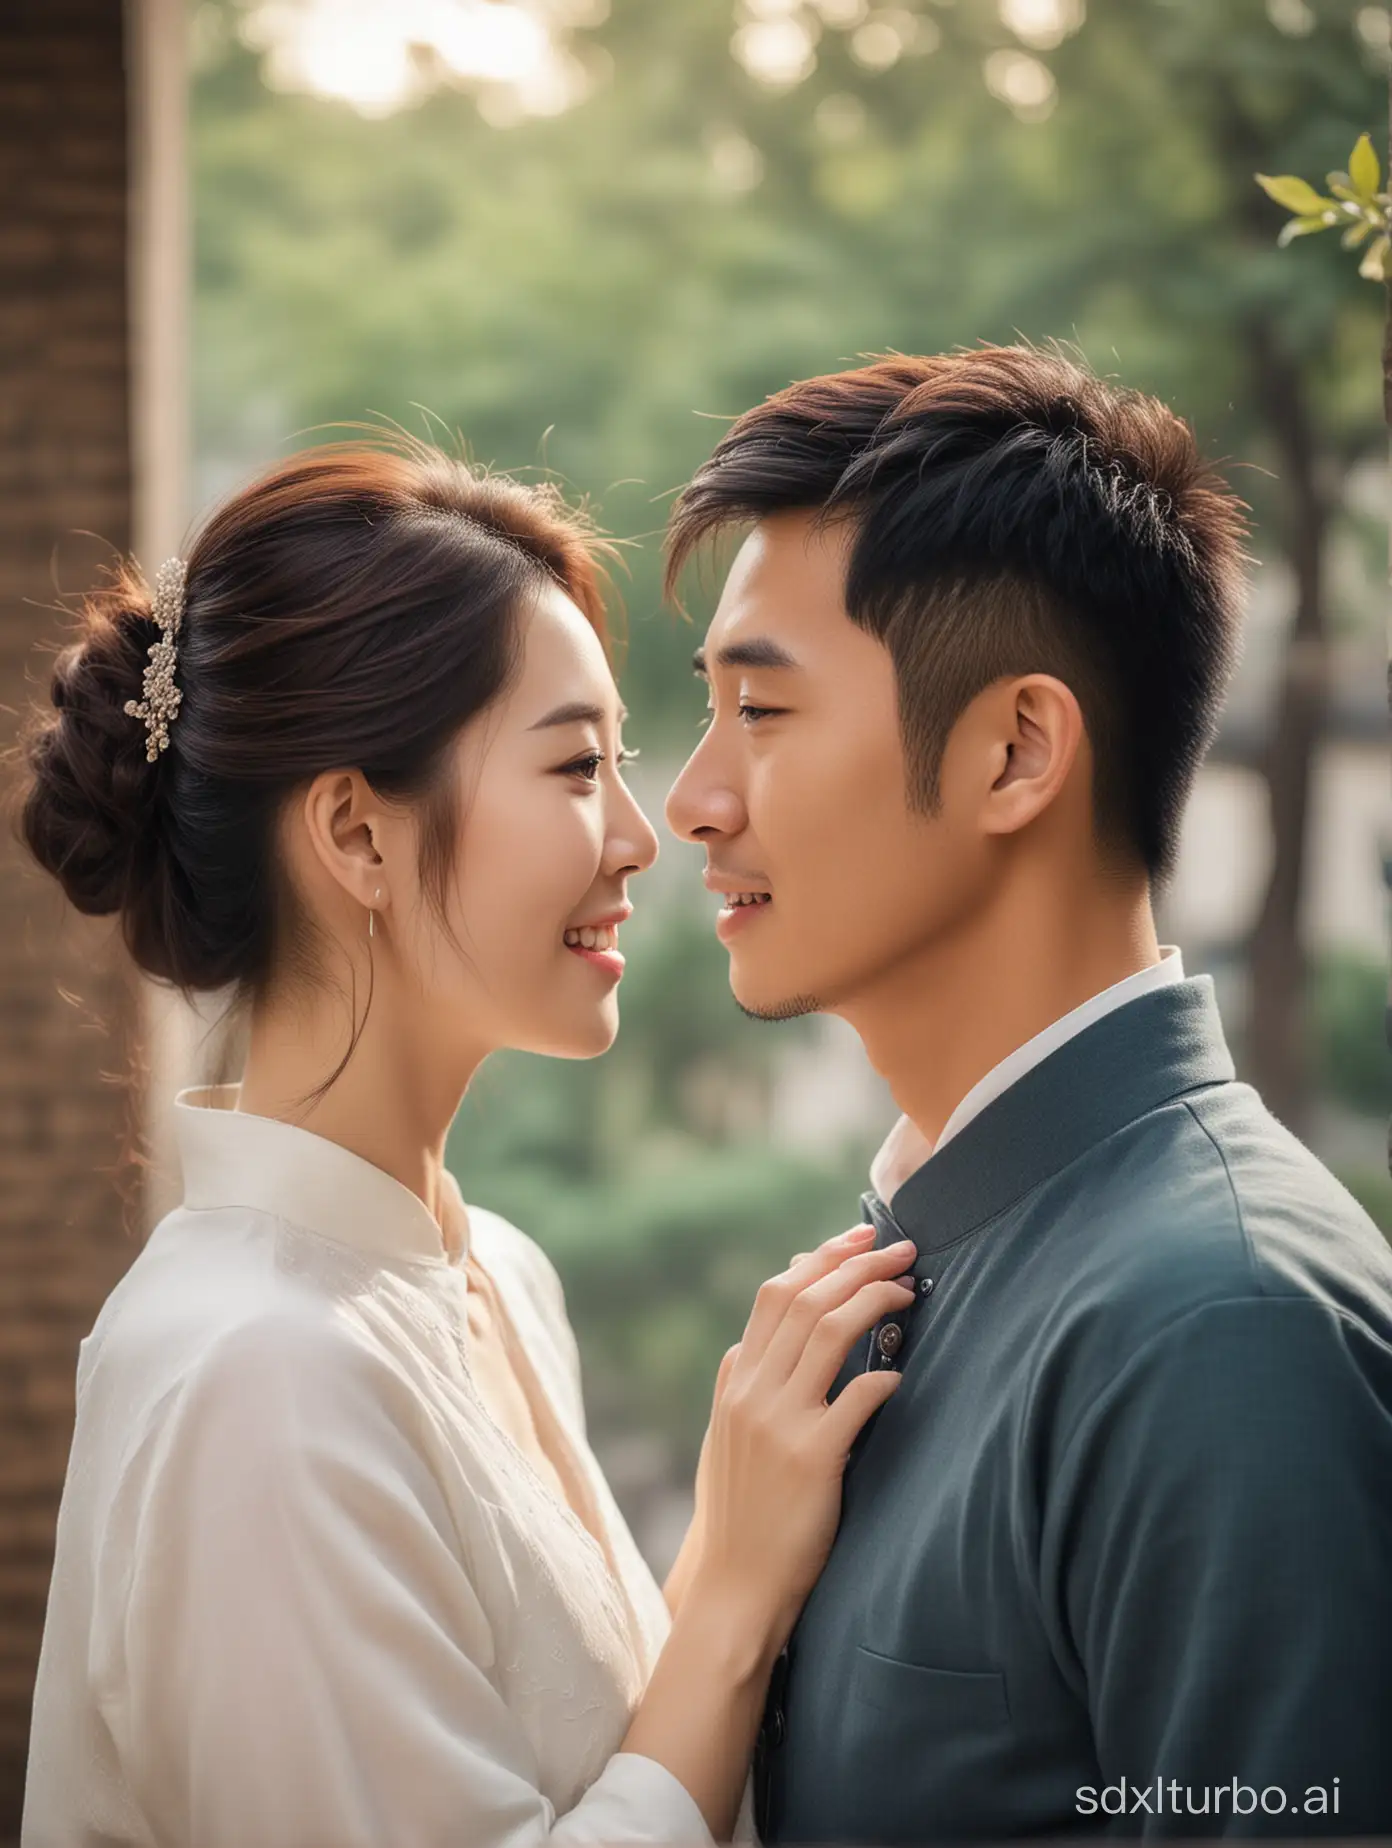 A pair of beautiful and handsome Chinese couple, facing each other, staring at each other affectionately, a warm and romantic scene.